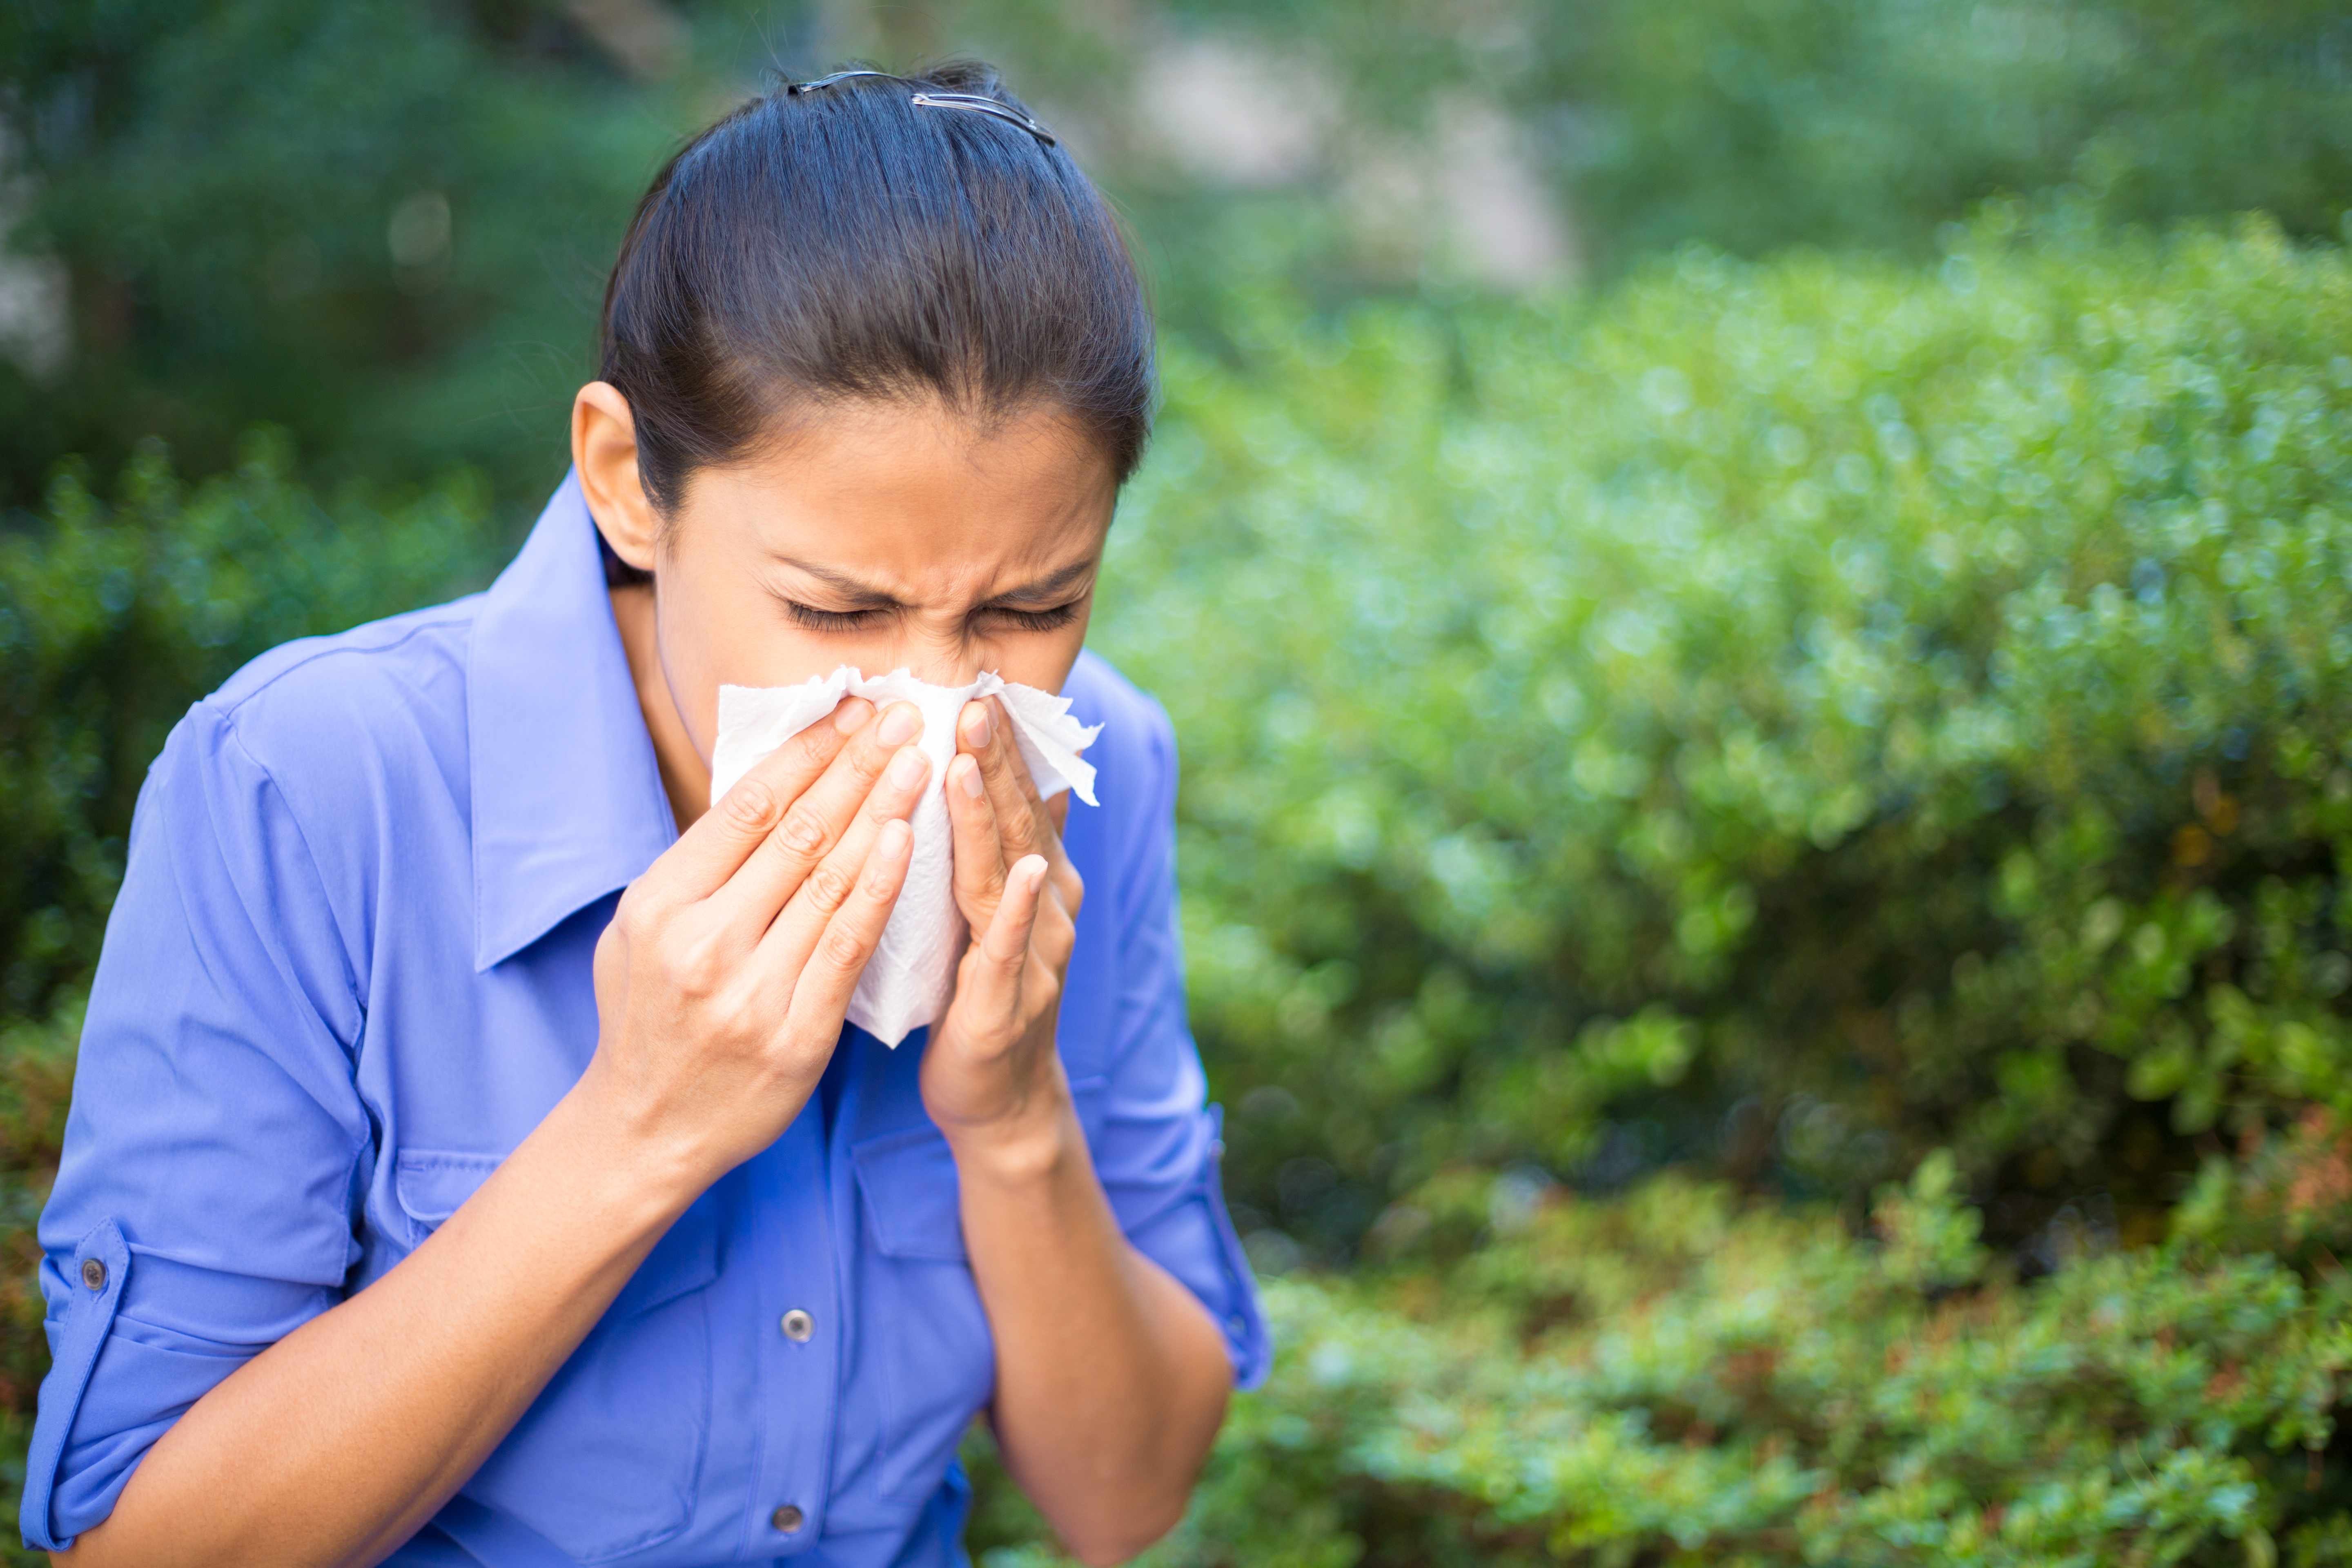 a woman blowing her nose into a tissue, sneezing